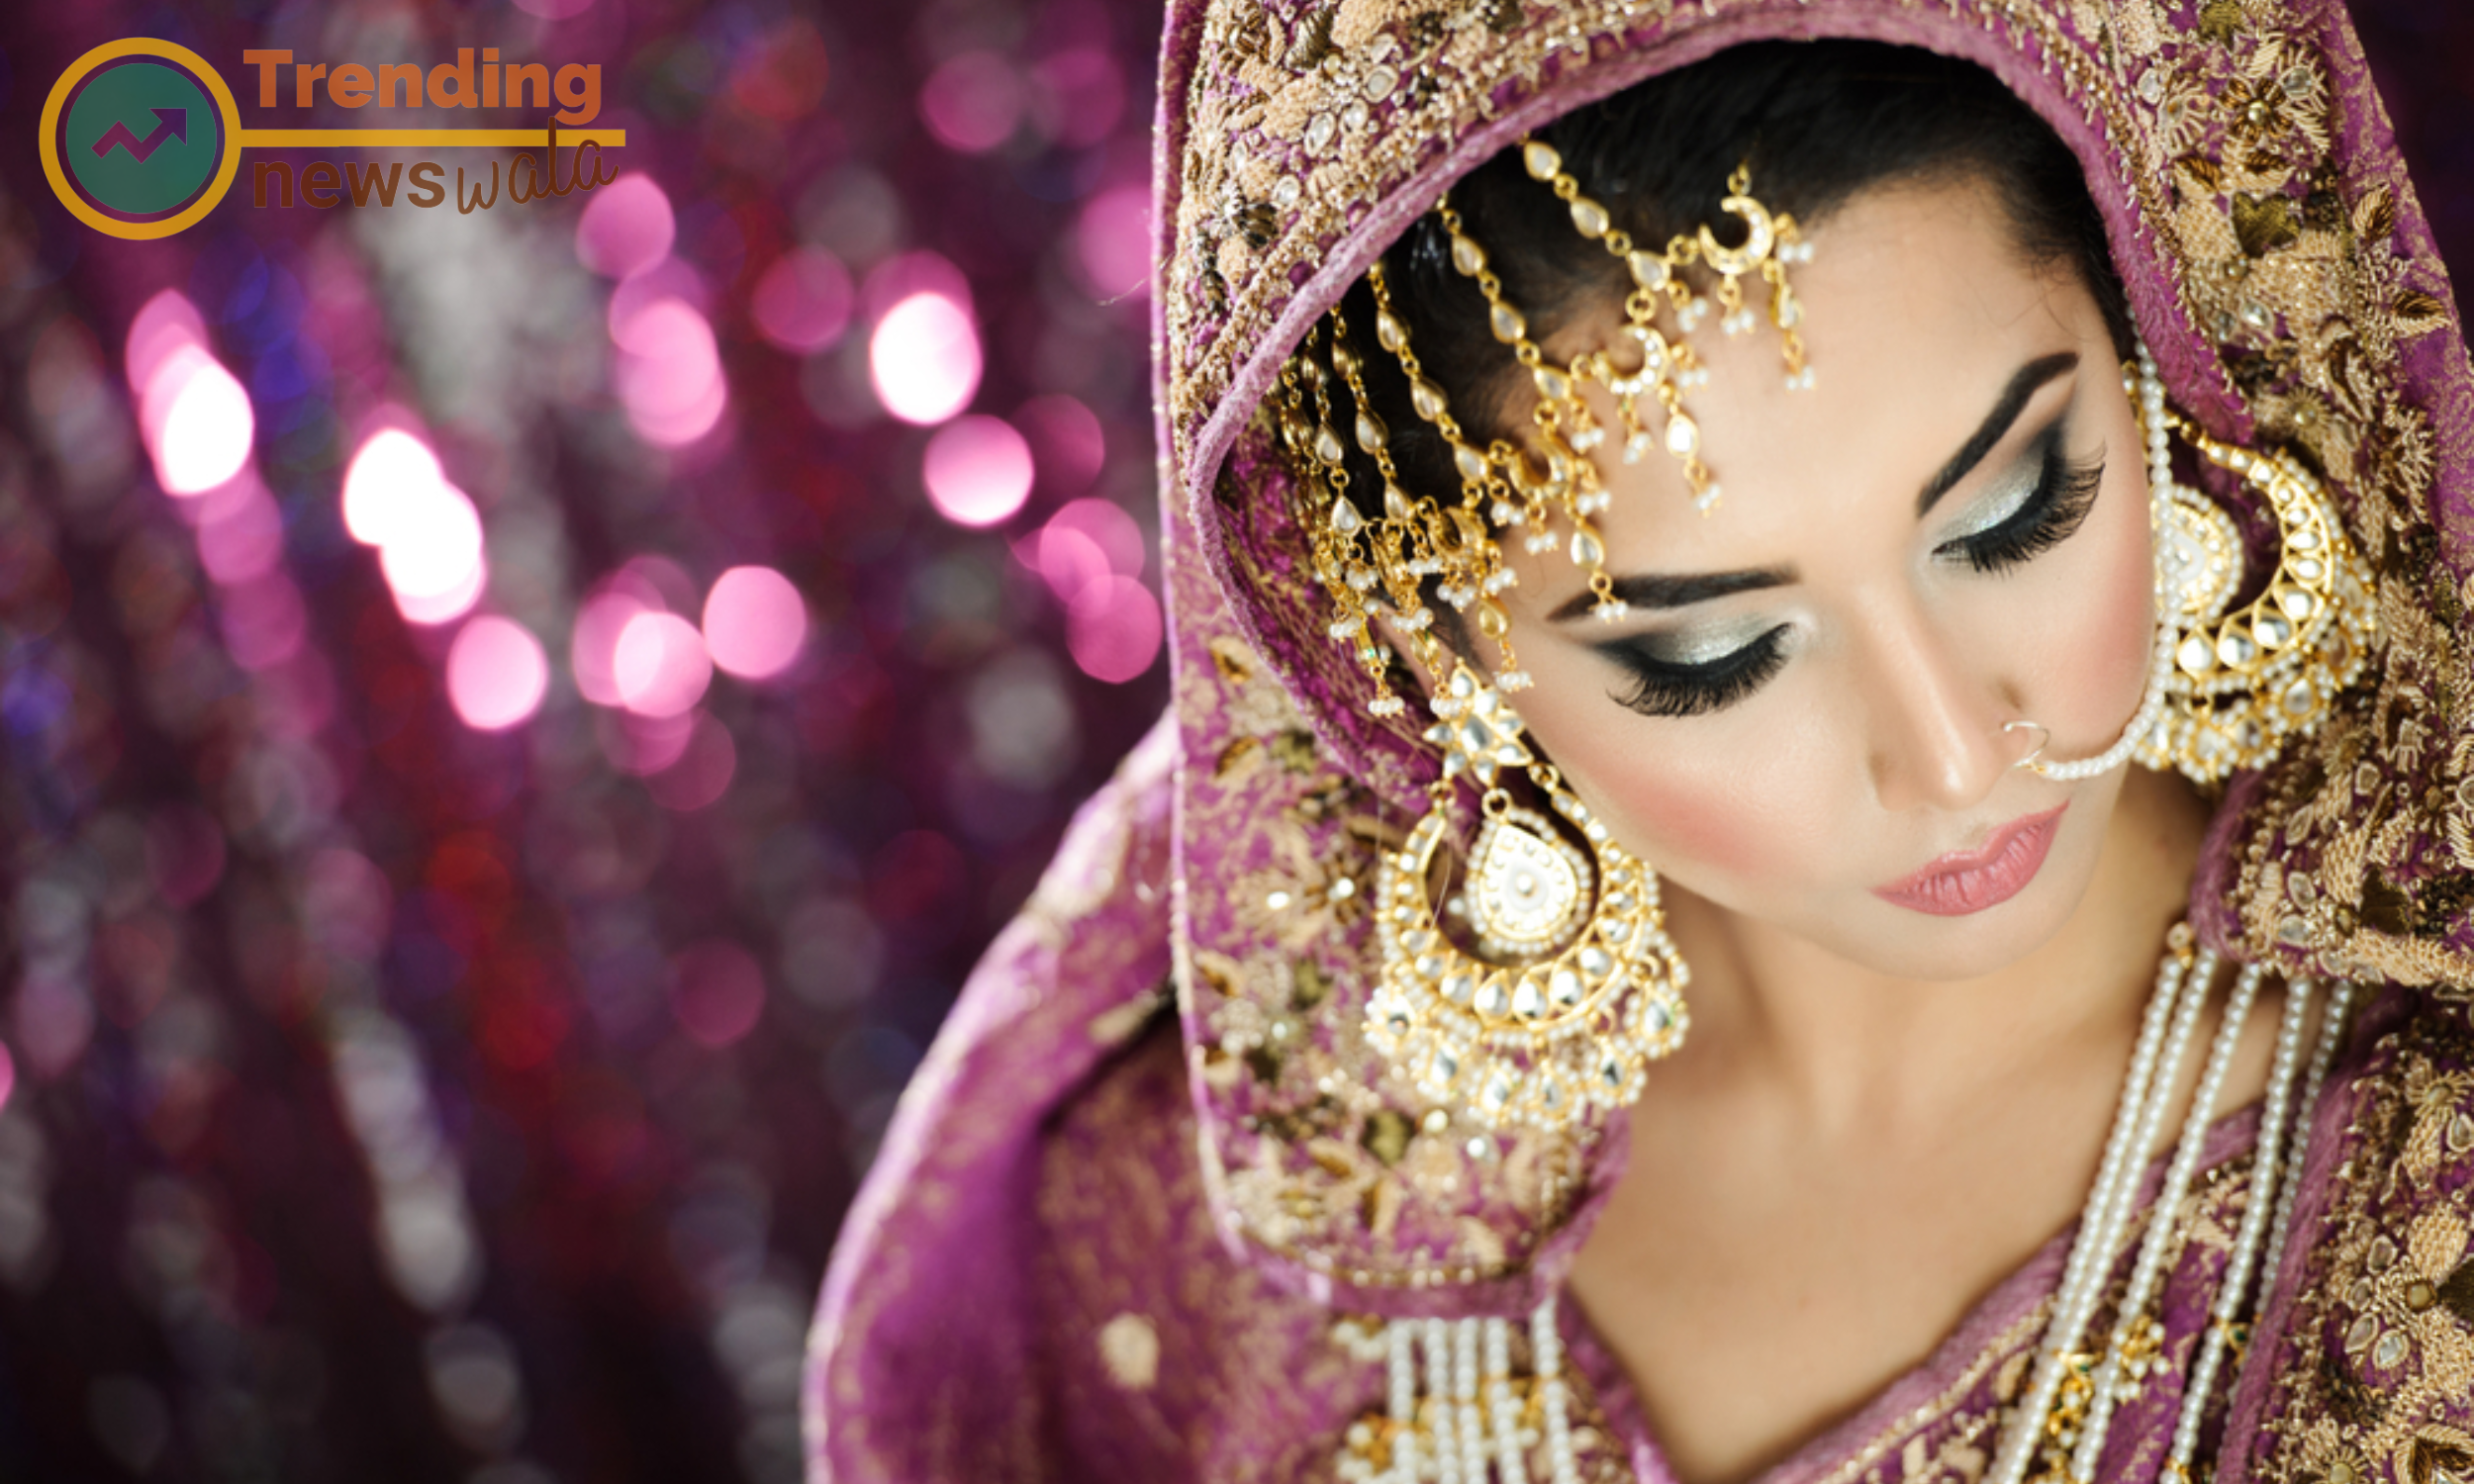 The jewelry industry is a significant economic force in India